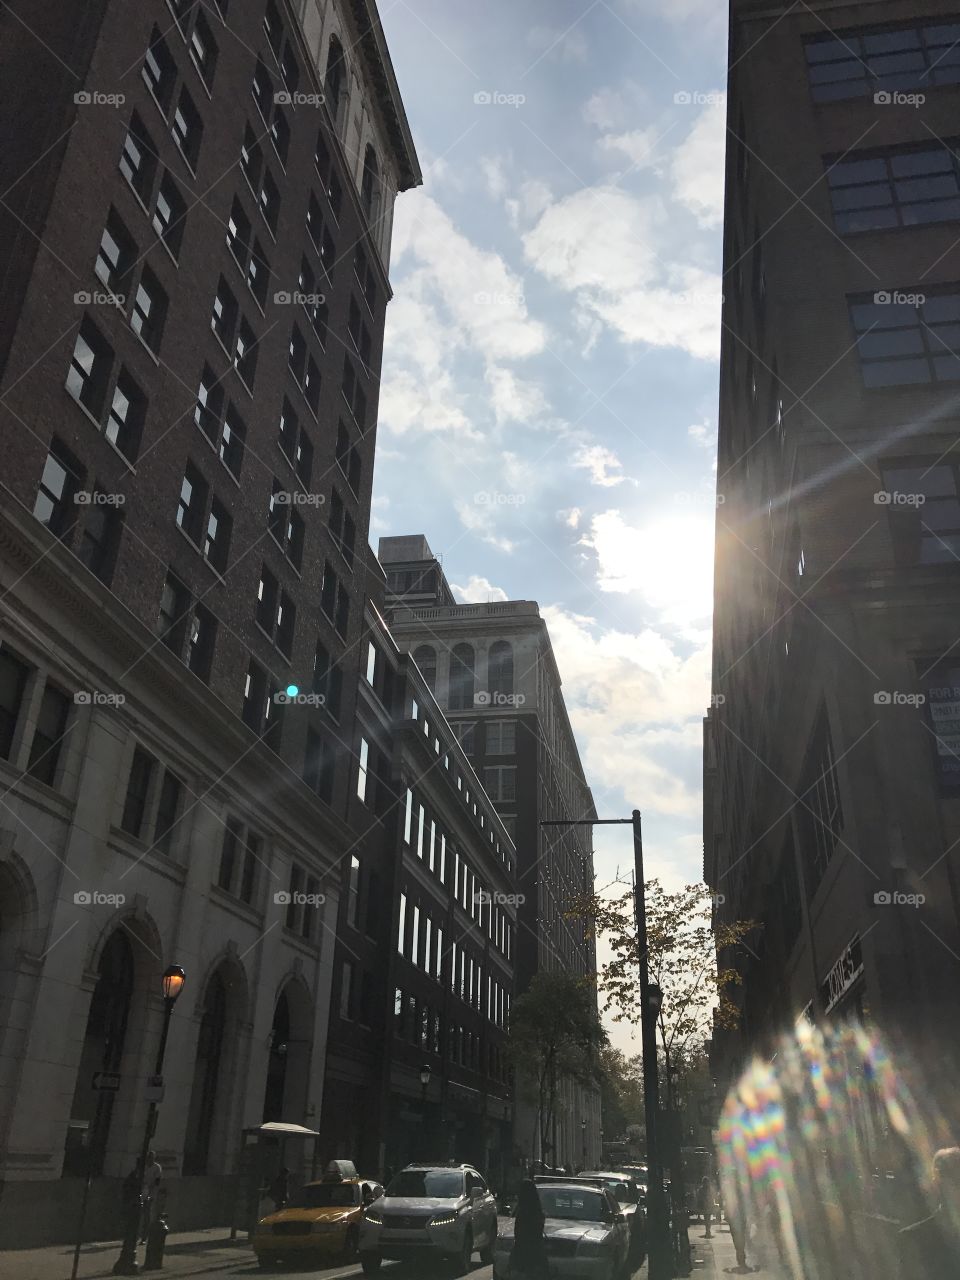 Sunlight on the streets of Philly!